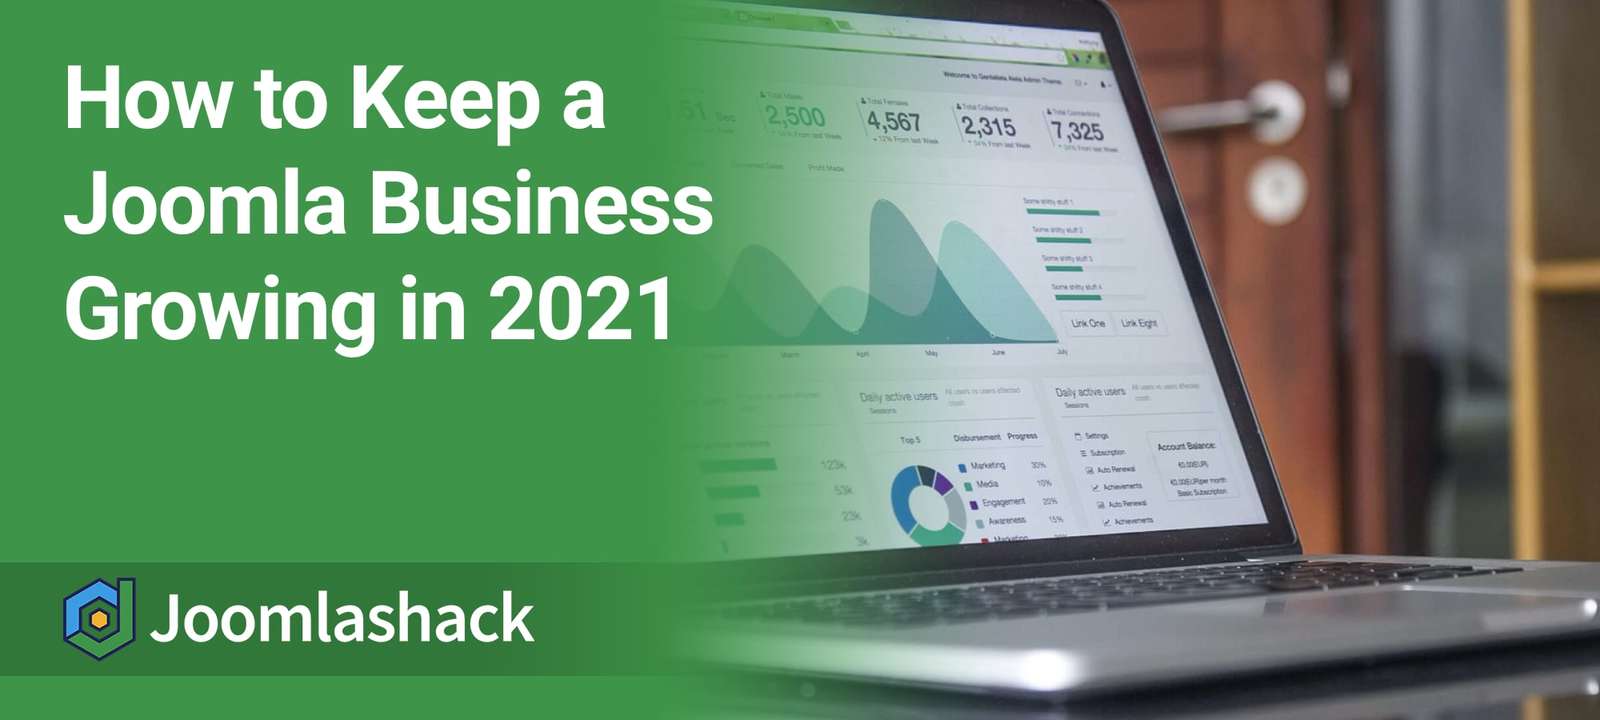 How to Keep a Joomla Business Growing in 2021